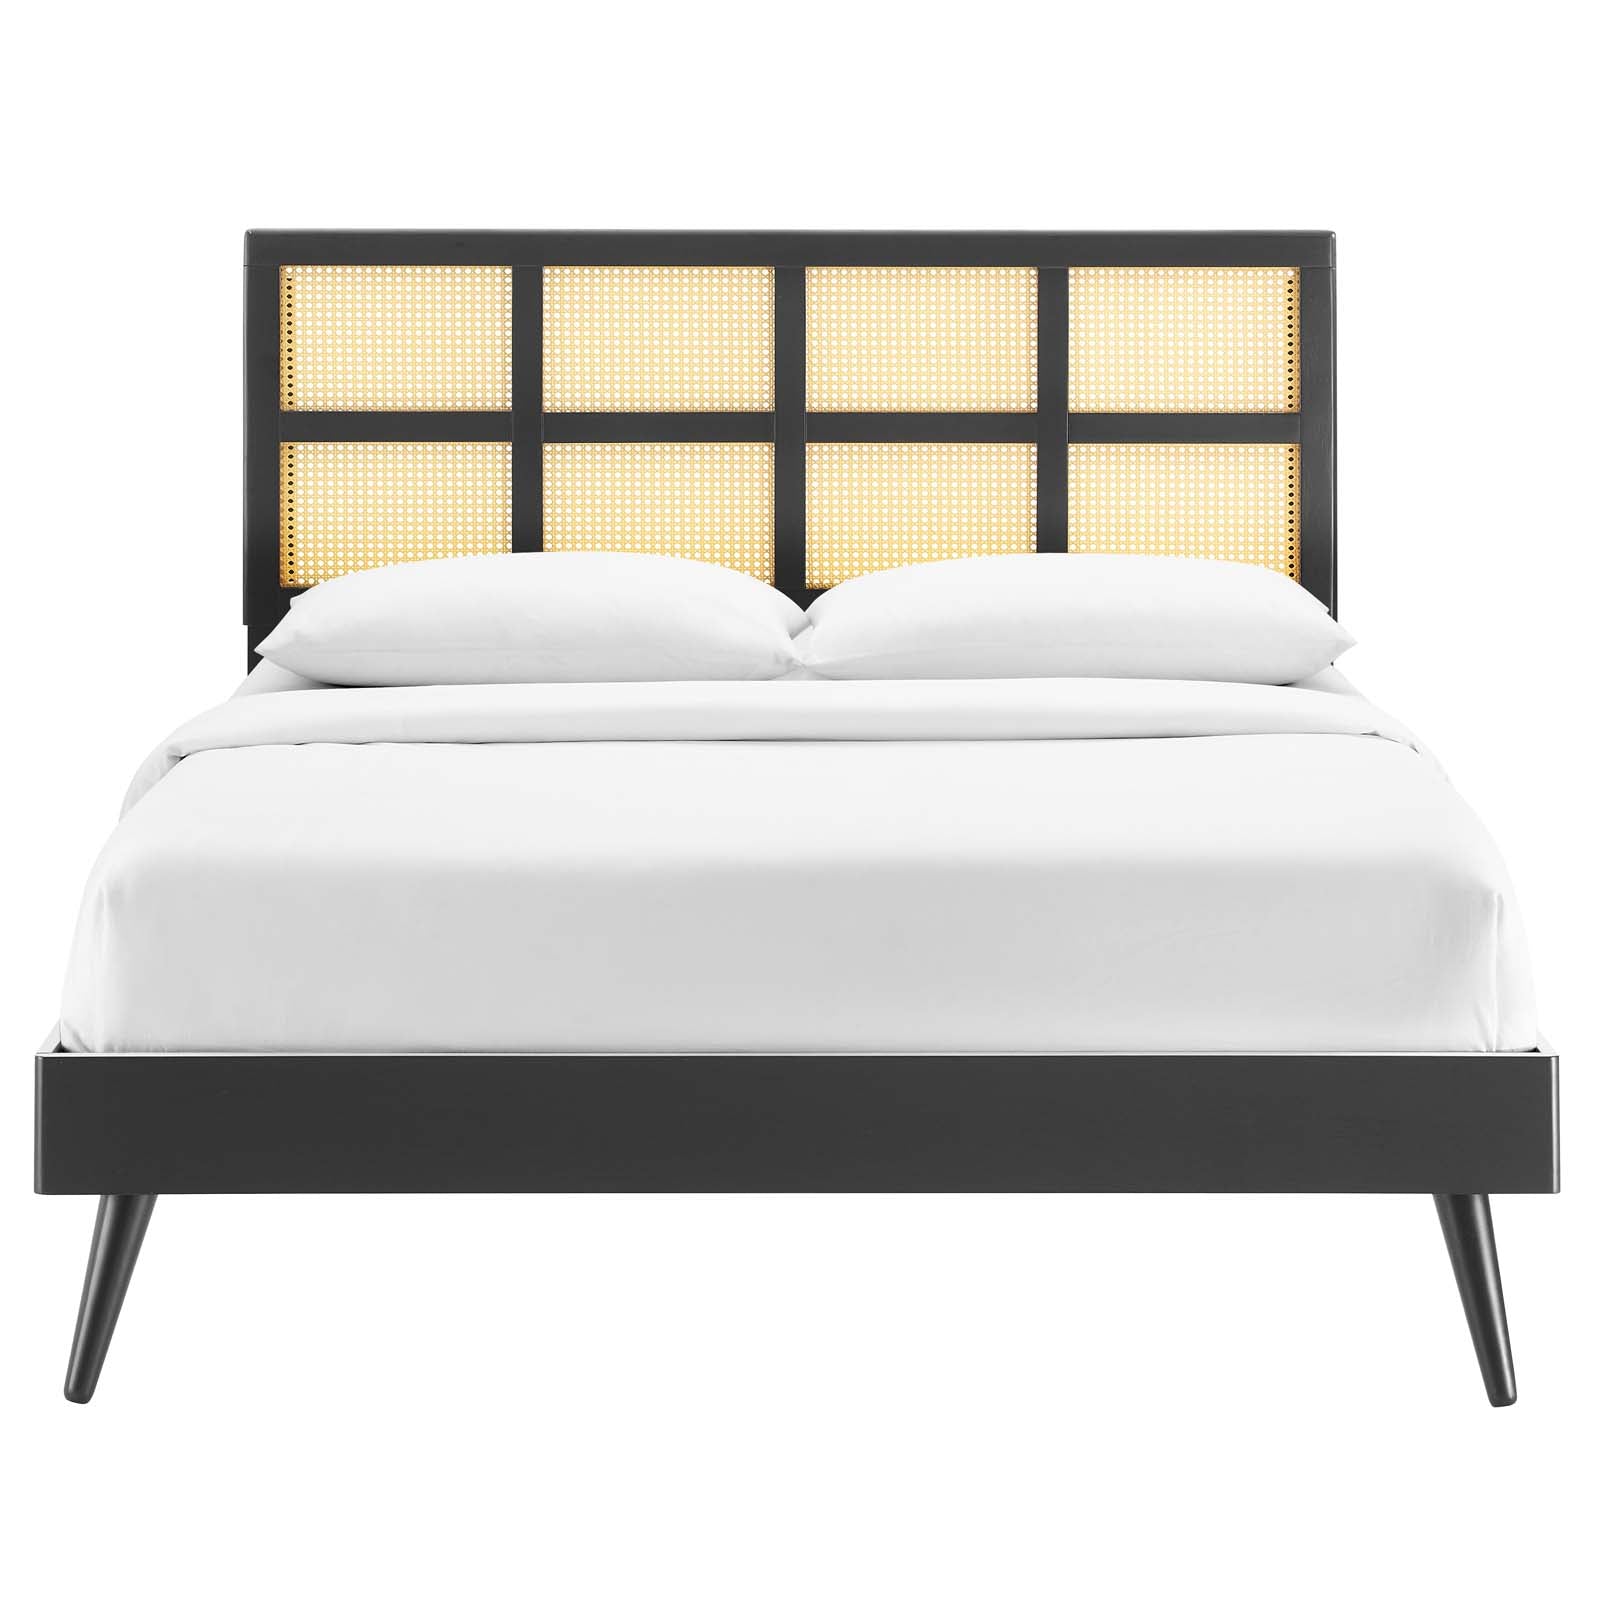 Sidney Cane and Wood Full Platform Bed With Splayed Legs